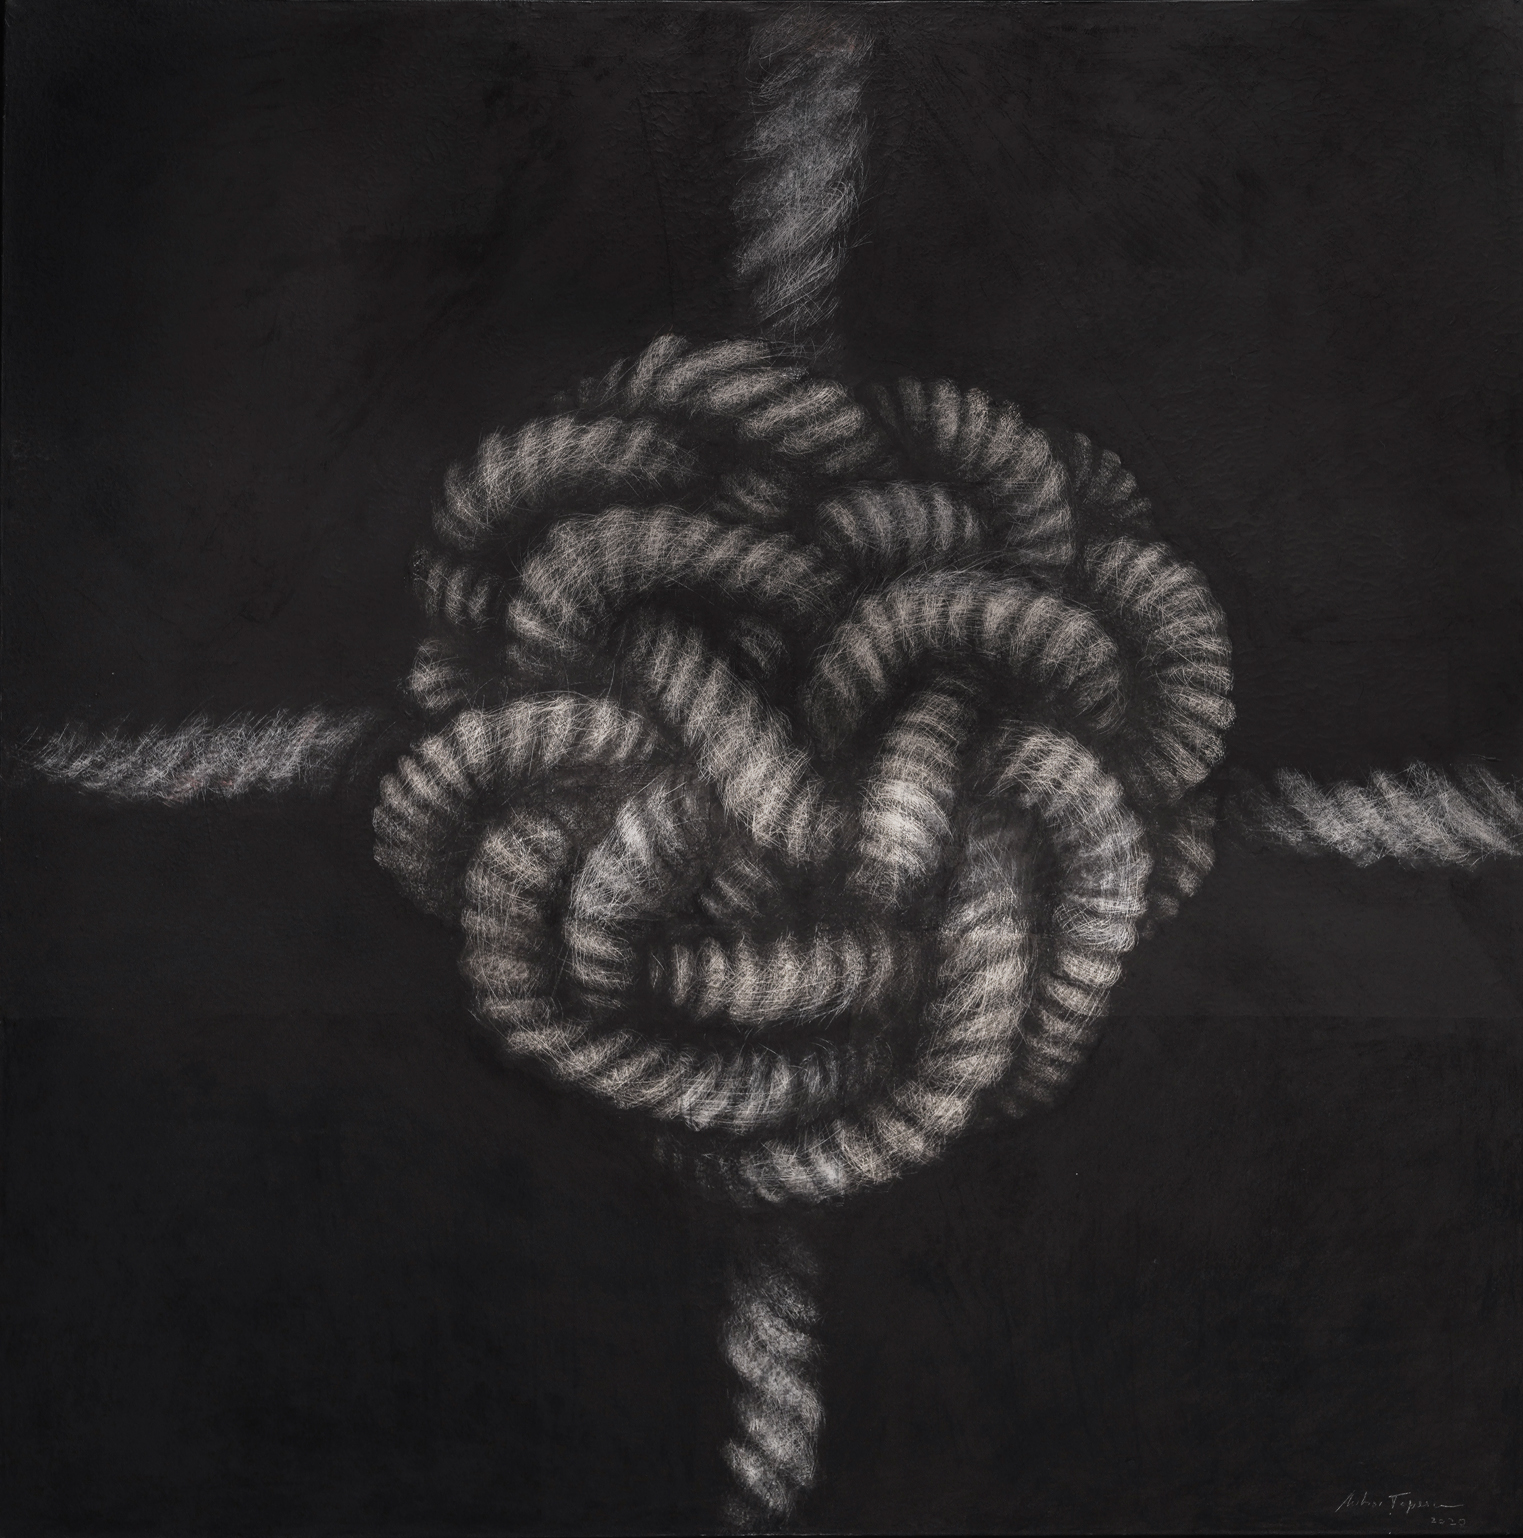 Mihai Țopescu Node 1” Scratch drawing on charcoal covered canvas 120 x120 cm, 2020